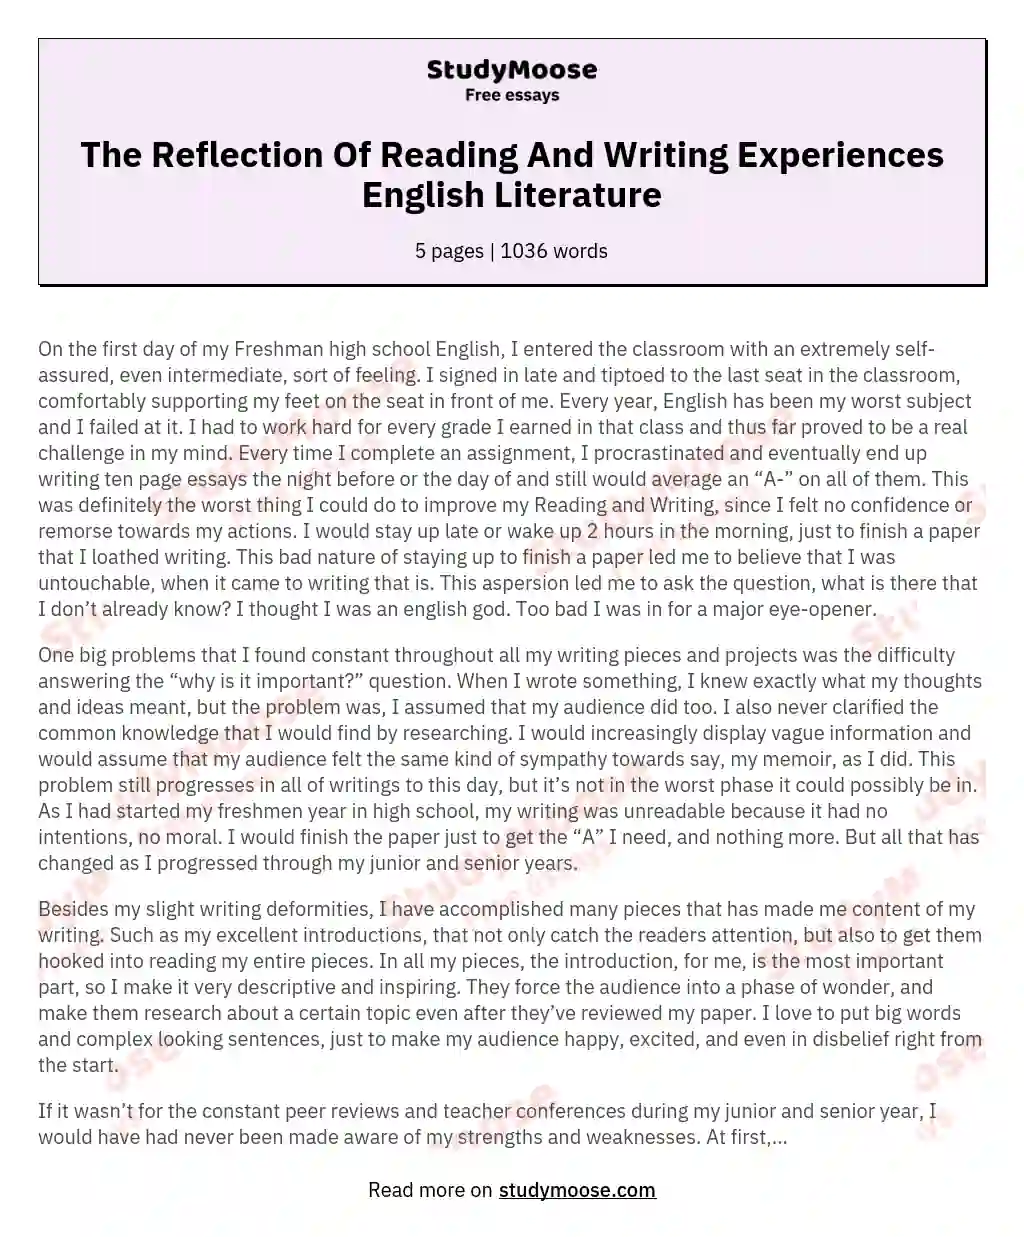 The Reflection Of Reading And Writing Experiences English Literature essay